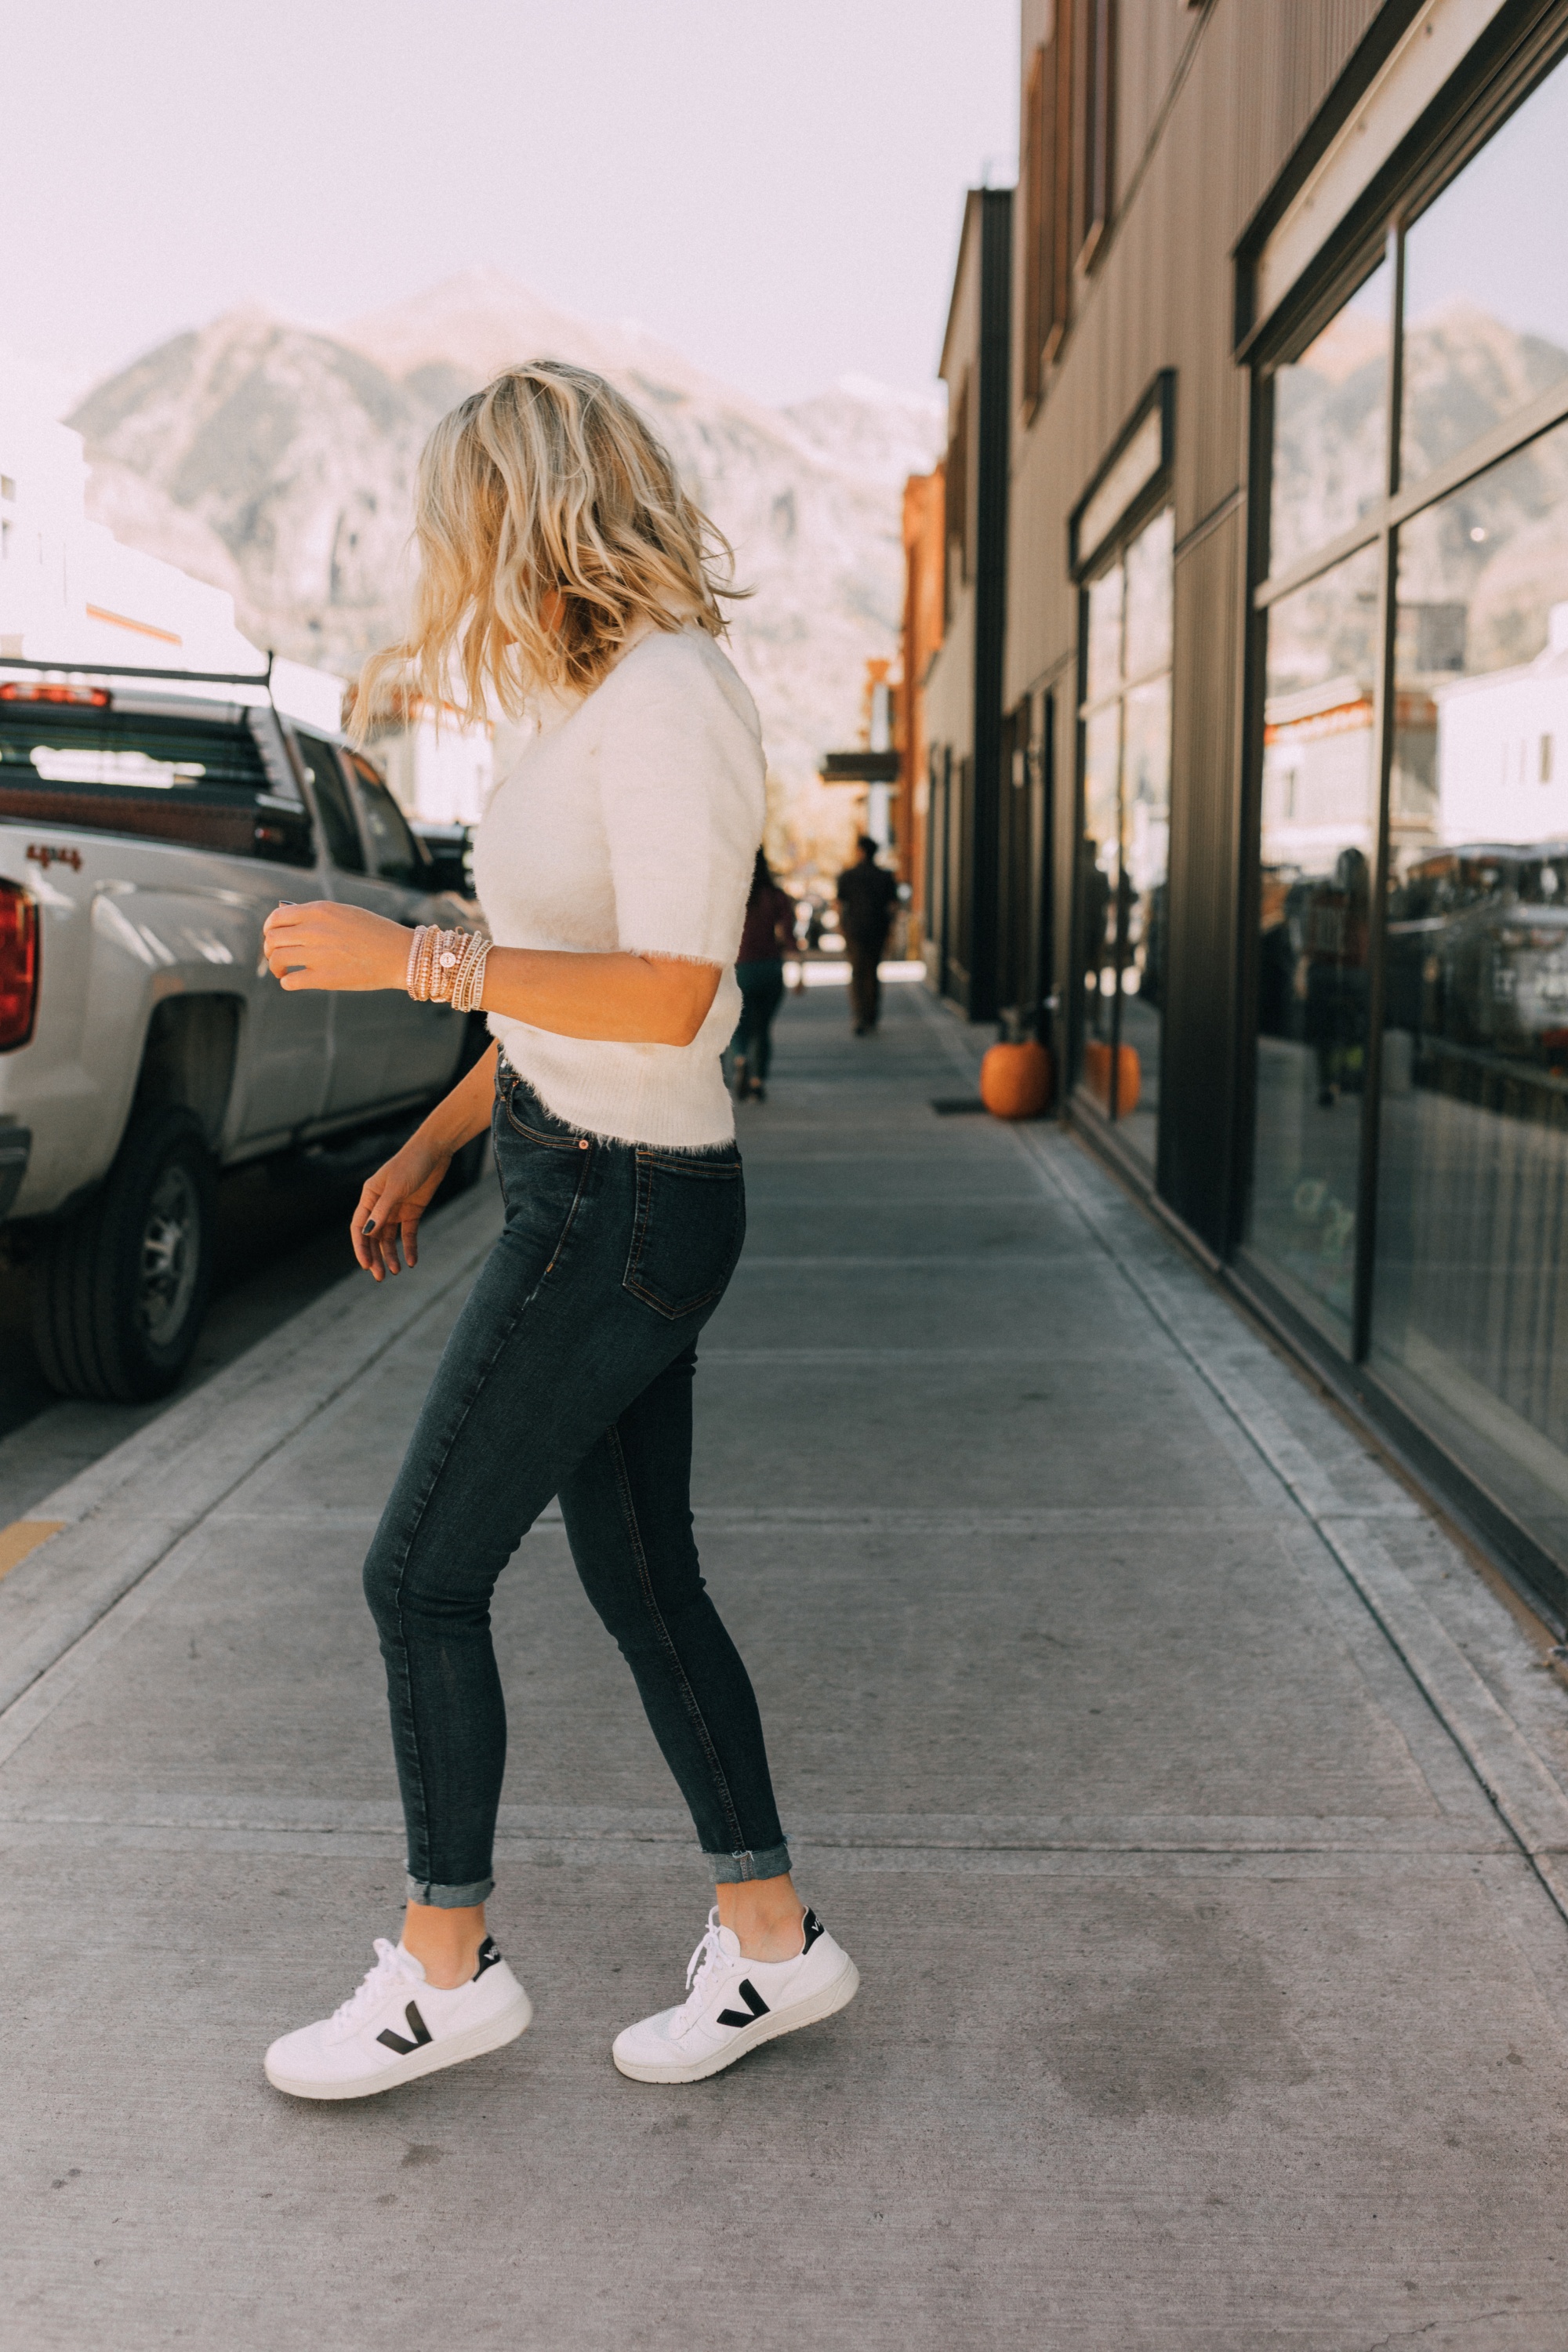 Fall Jewelry, Fashion blogger Erin Busbee of BusbeeStyle.com wearing three wrap bracelets by Victoria Emerson with dark wash skinny jeans, white fuzzy polo sweater, and Veja sneakers in Telluride, CO